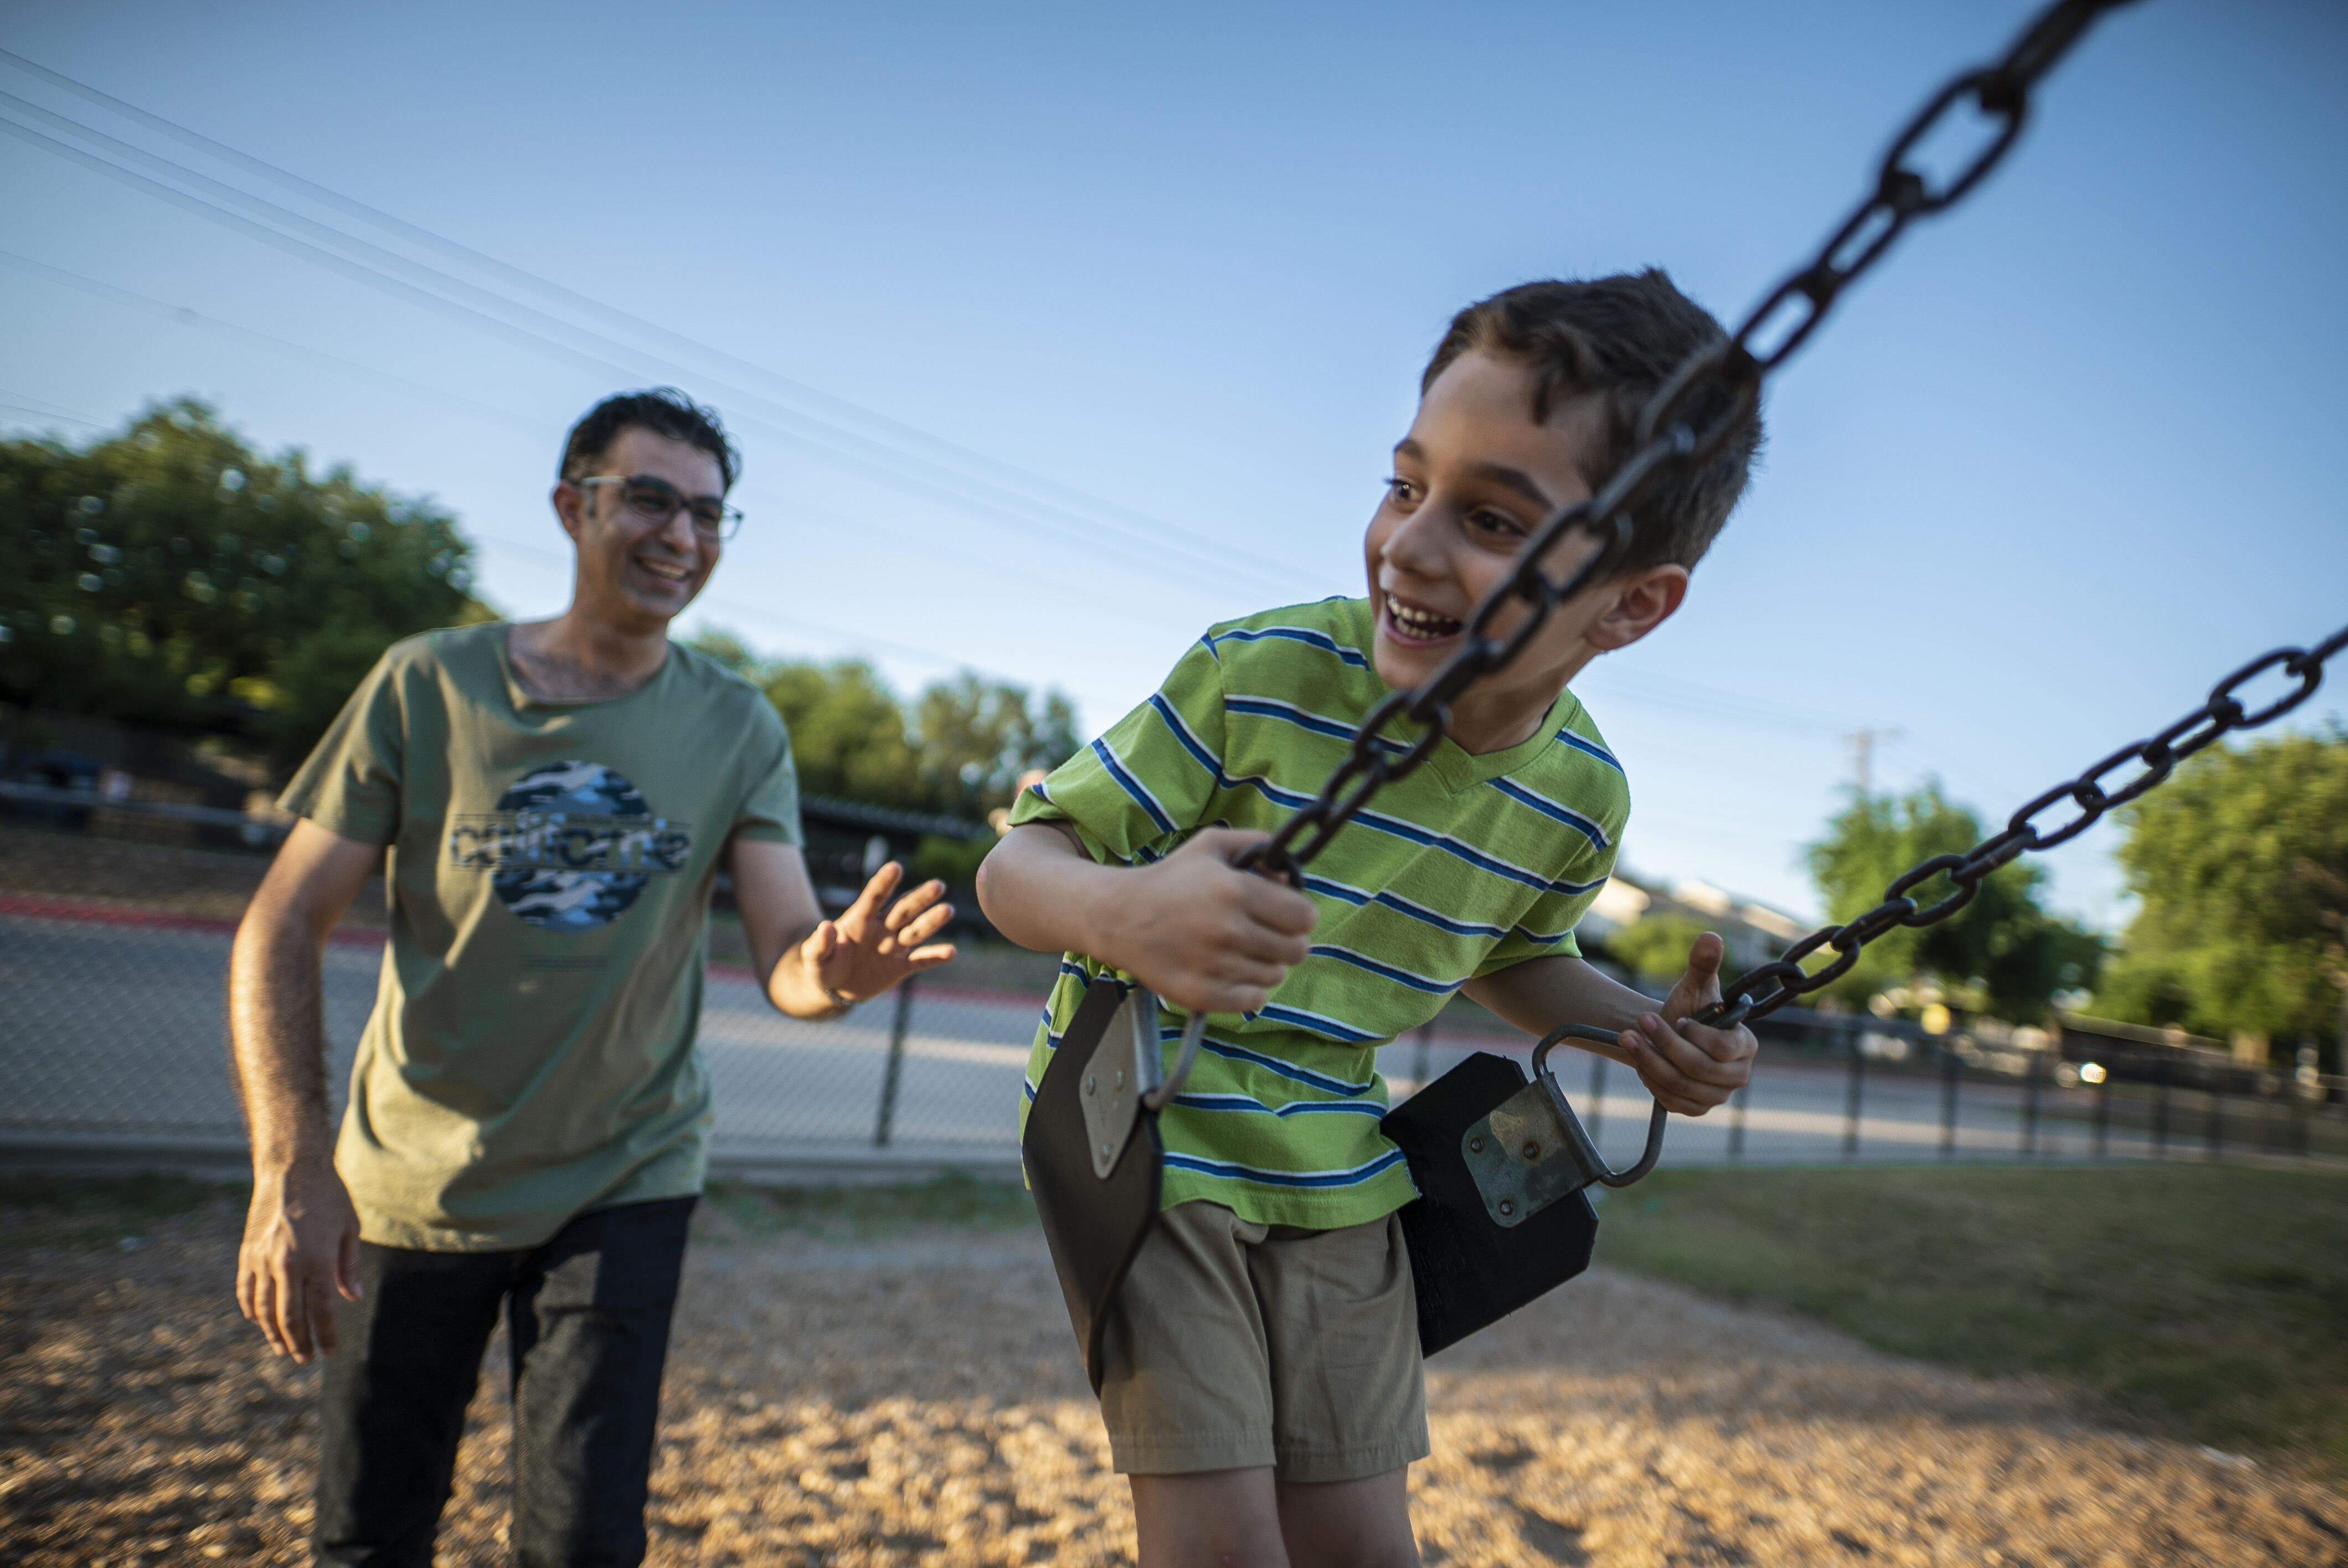 A father, Junaid, pushes his son Ridha on a swing in a playground in Dallas. The family arrived in the U.S. as refugees.